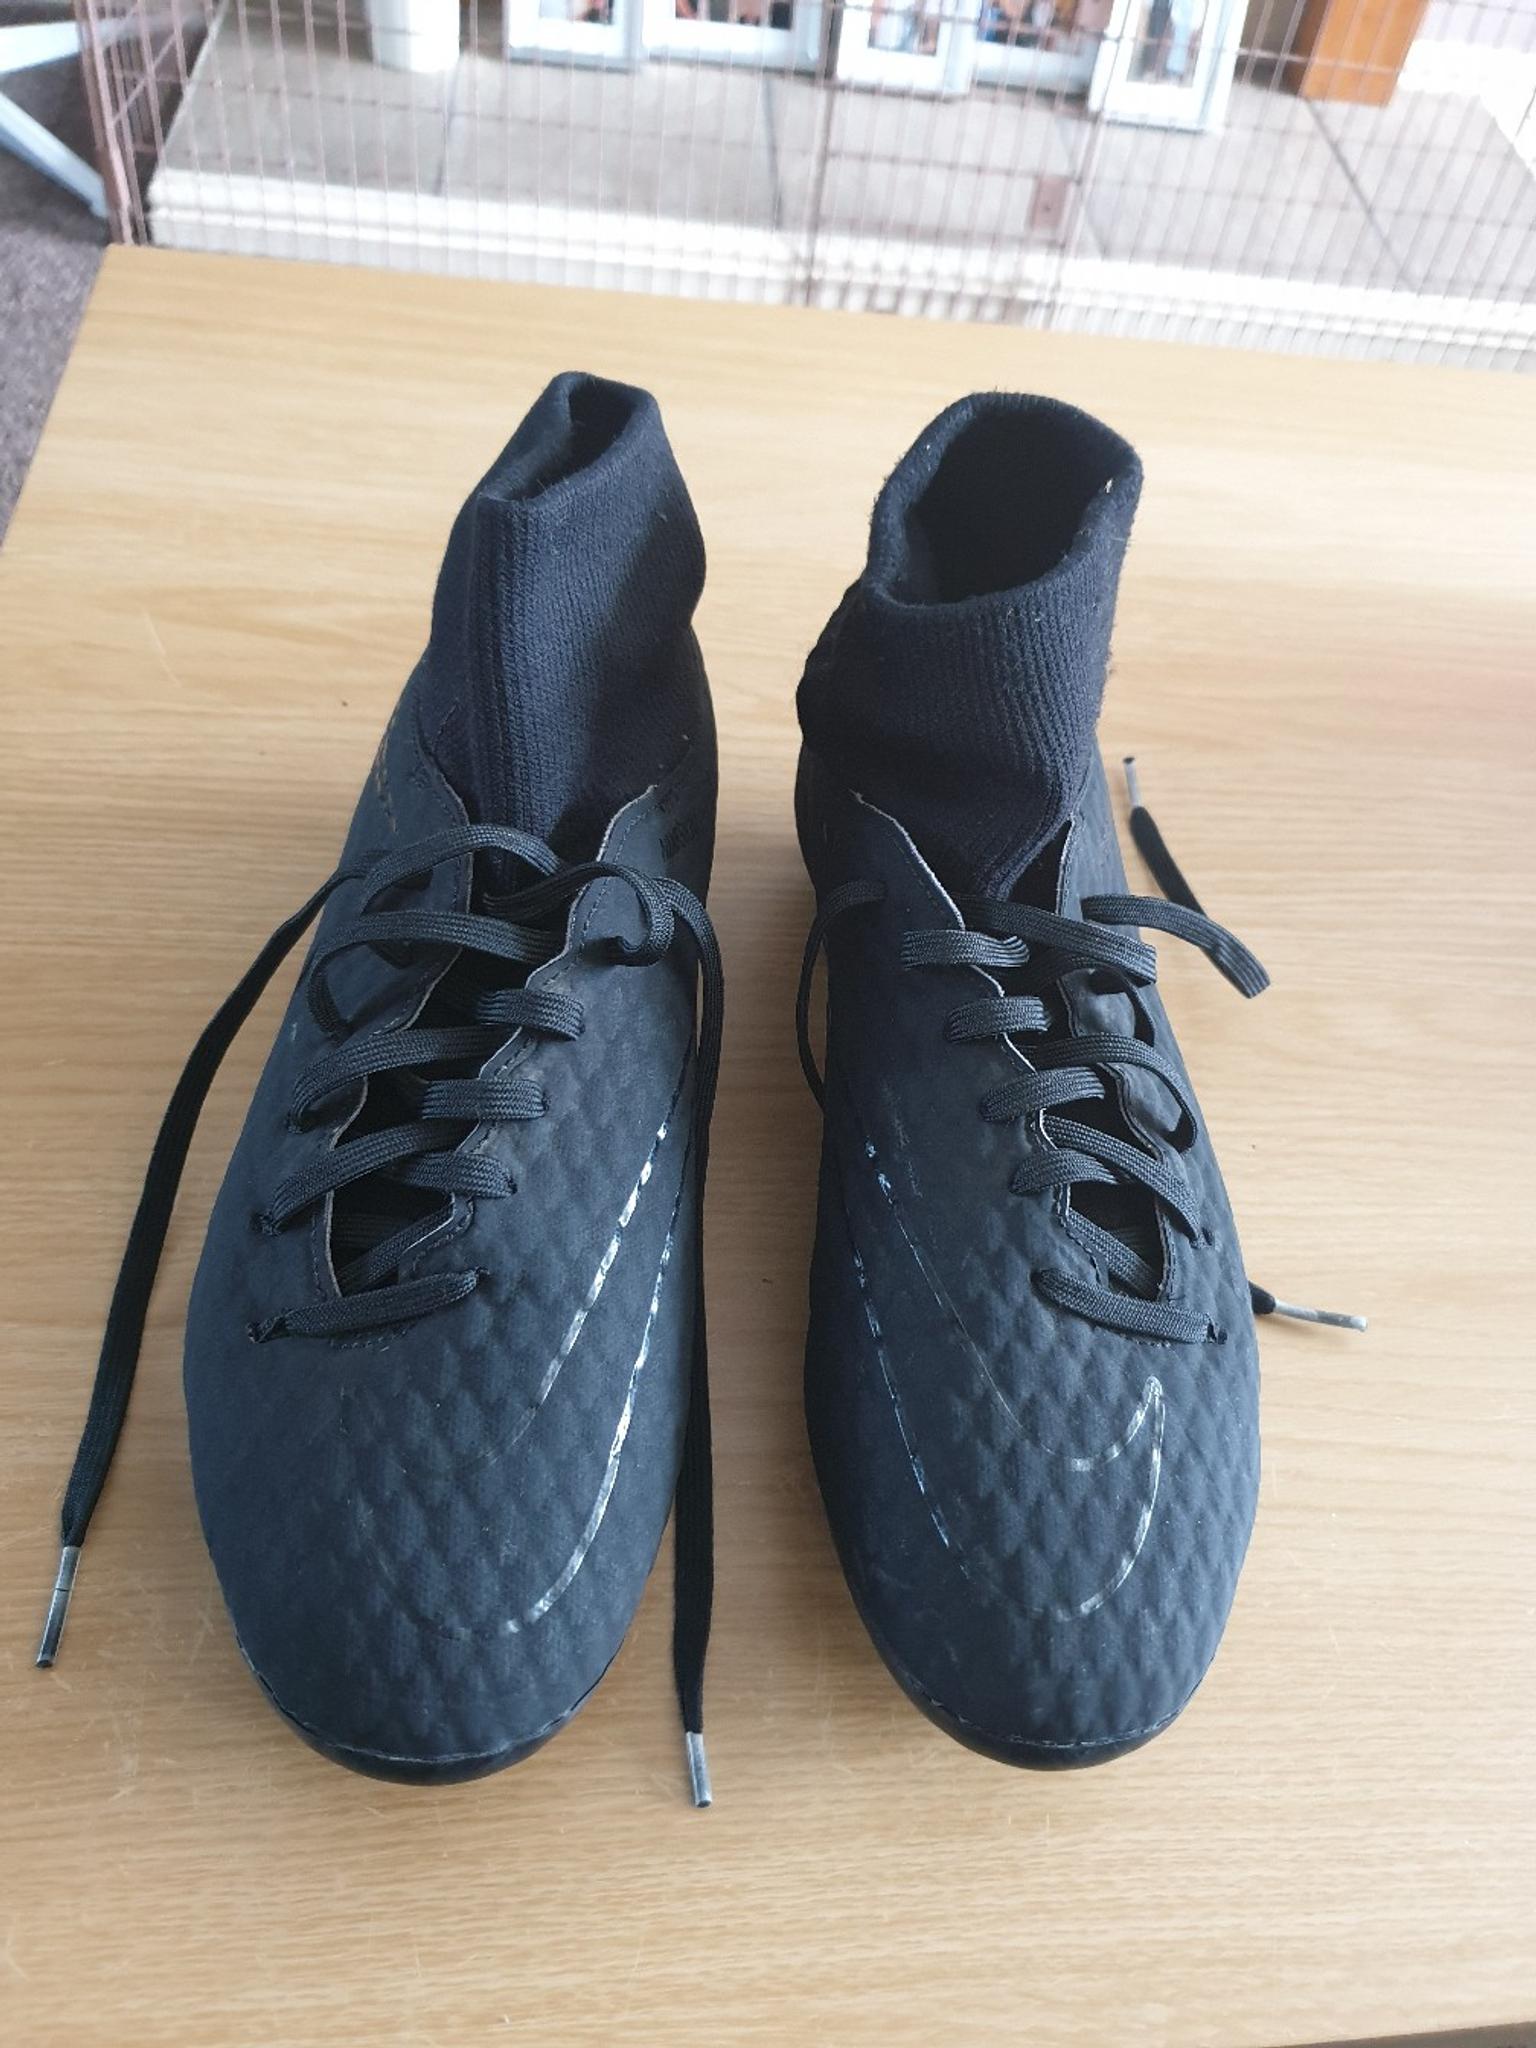 jd sports astro boots